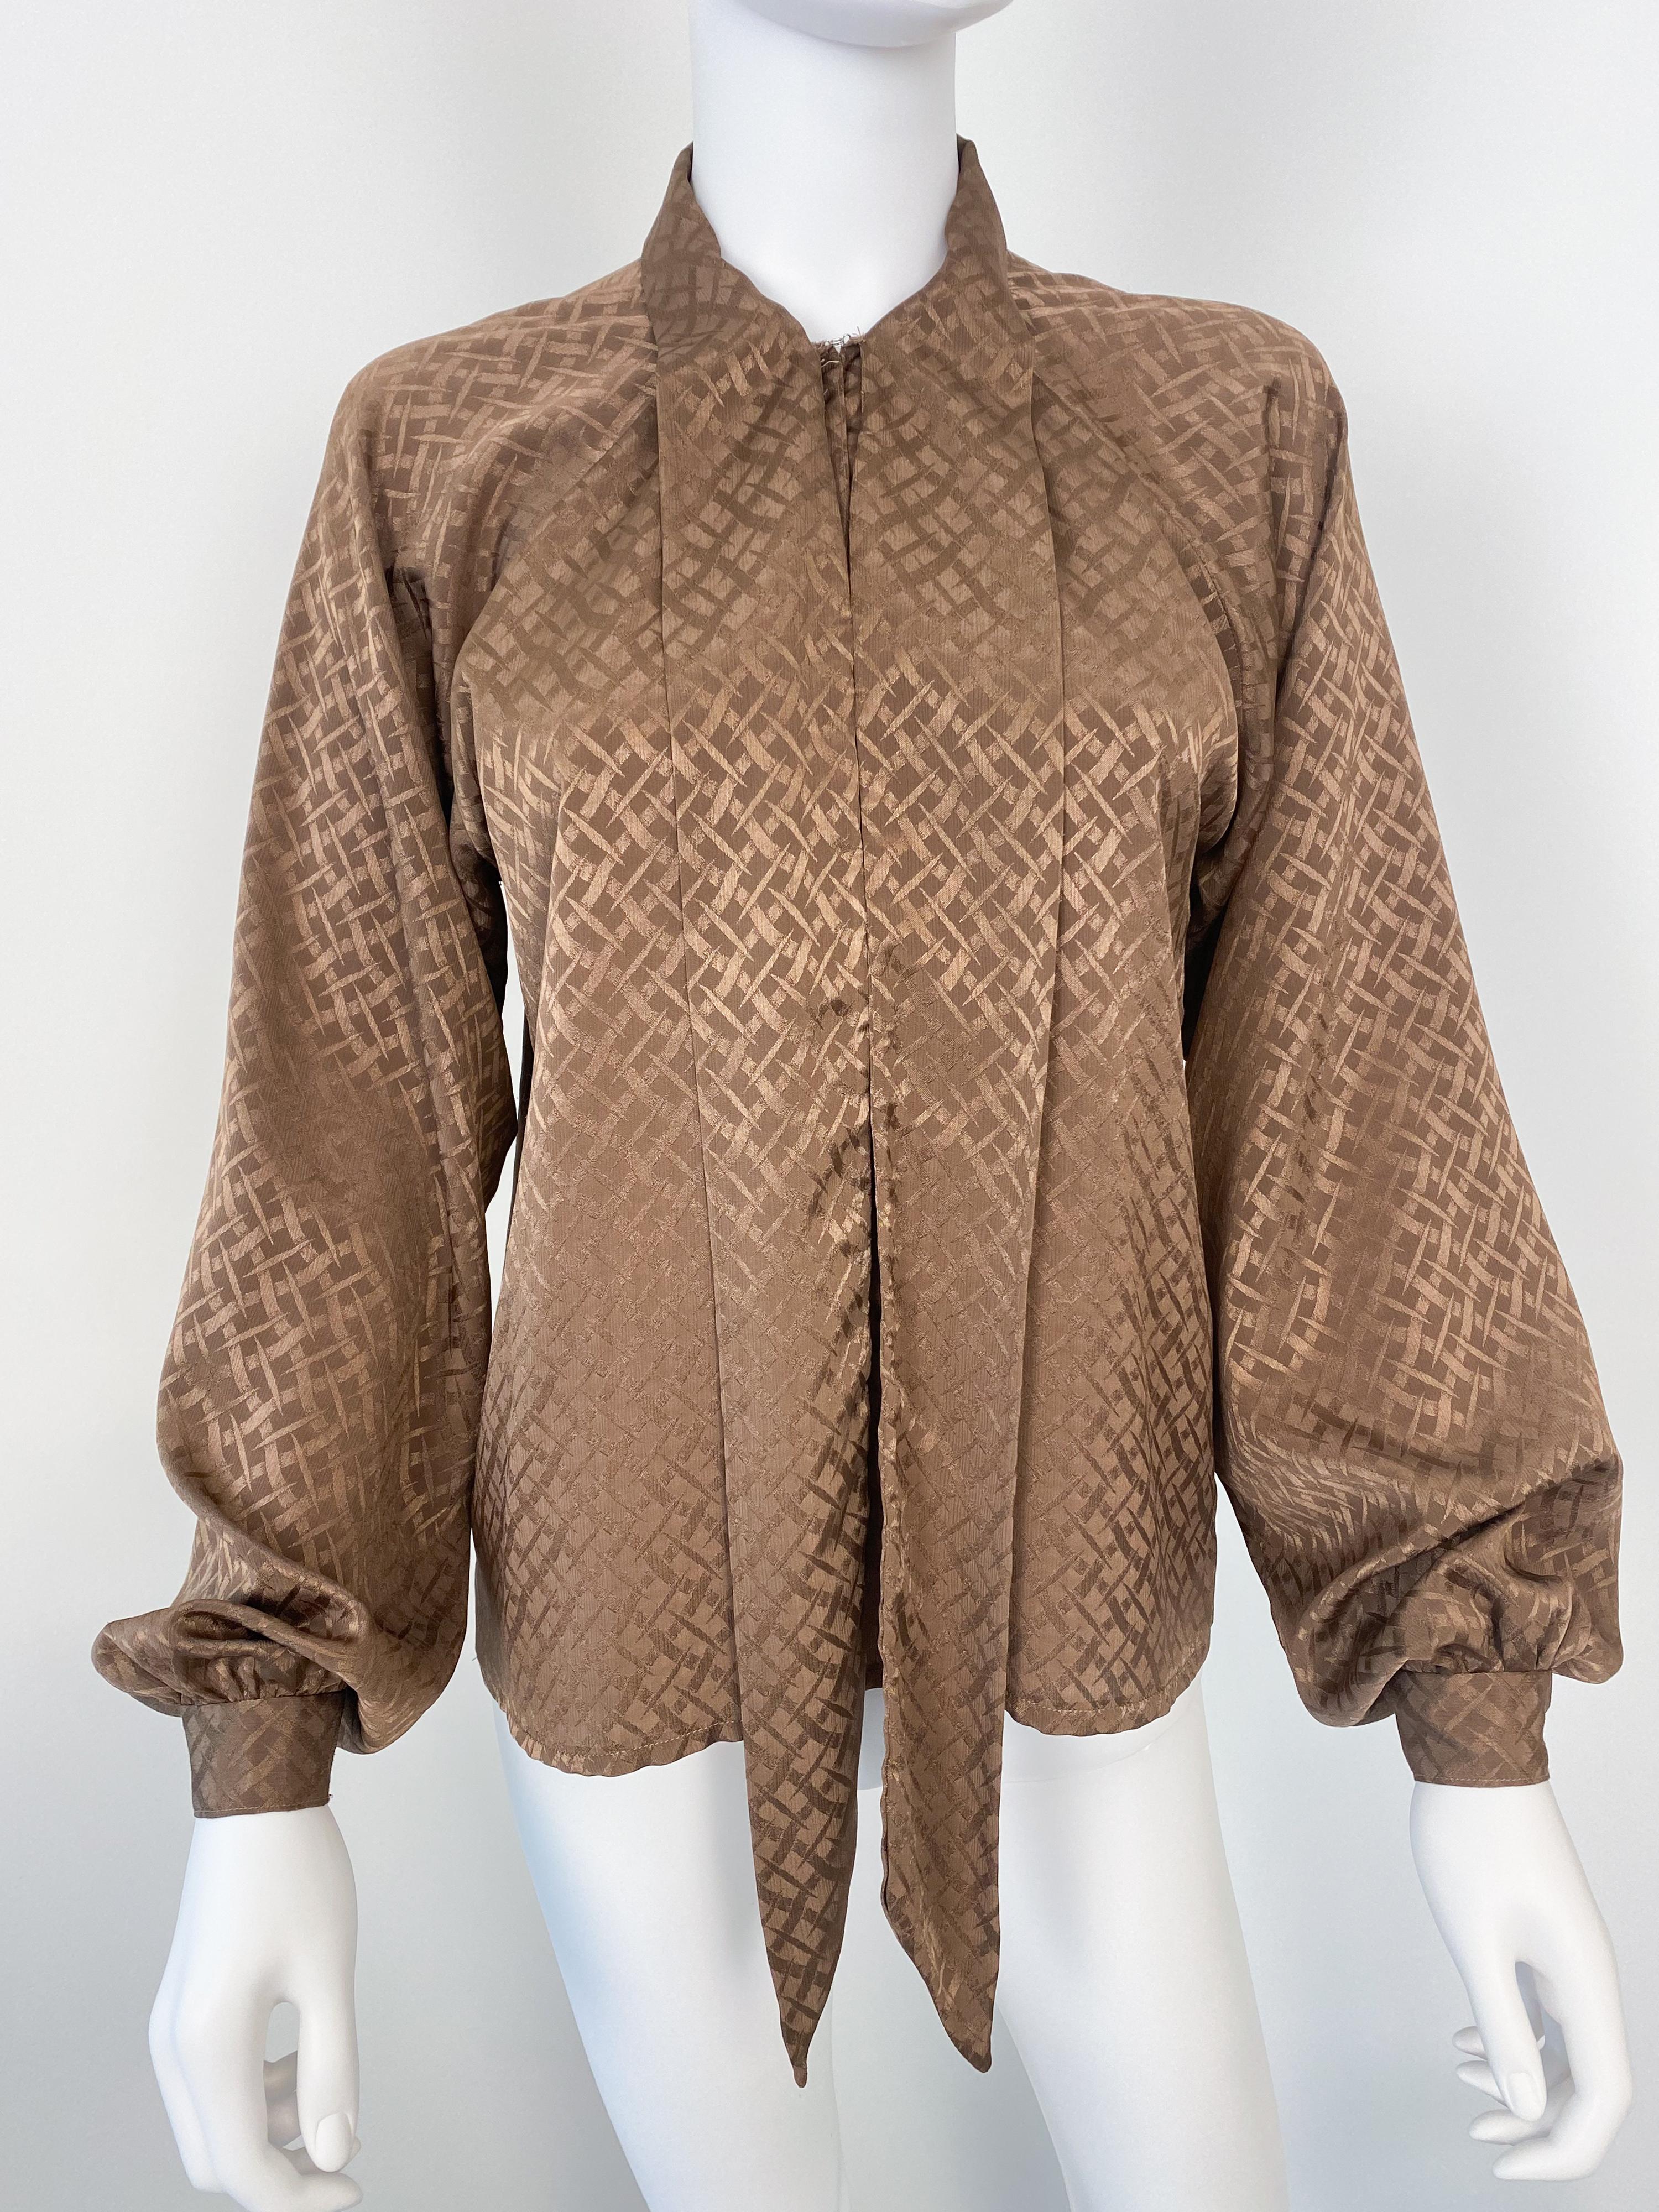 Wonderful vintage 1980s silky polyester pussy bow blouse in a peasant-style silhouette with attached scarf-bow. Cocoa brown color fabric with tone-on-tone geometric pattern. The pullover construction has a partially open front with a metal hook at